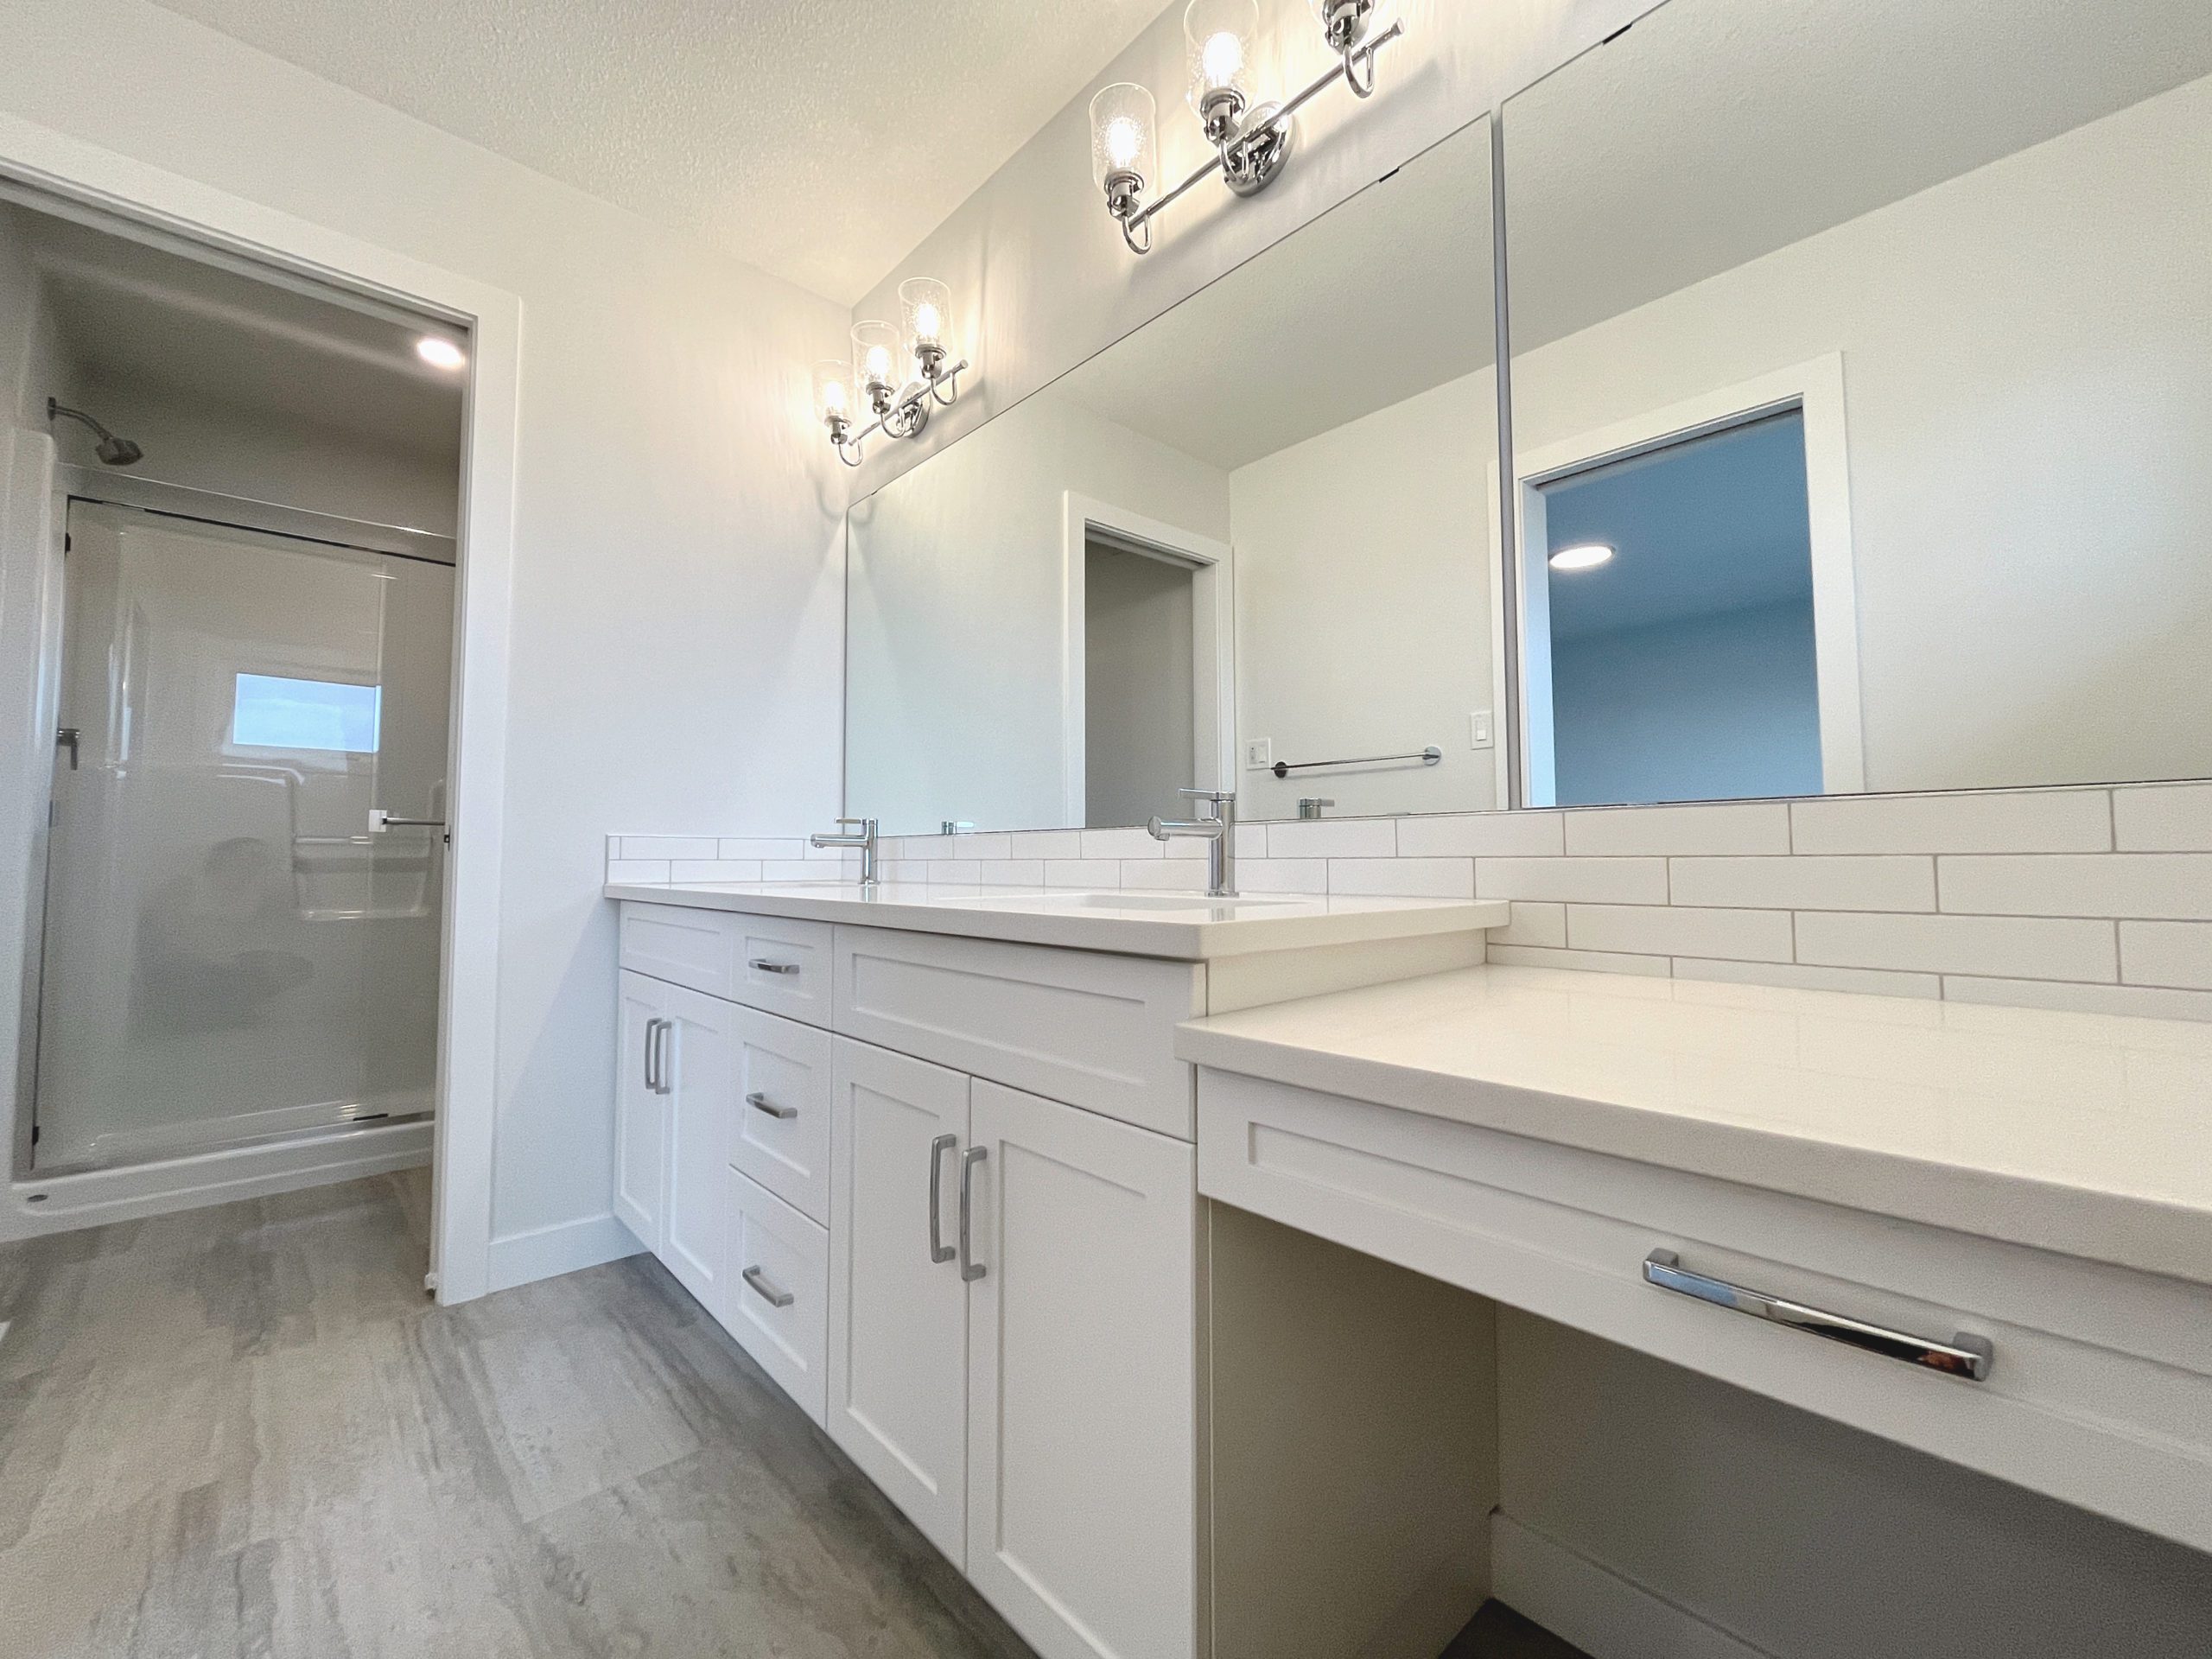 Primary bathroom with double sinks, makeup counter and a large mirror, shows door to water closet.